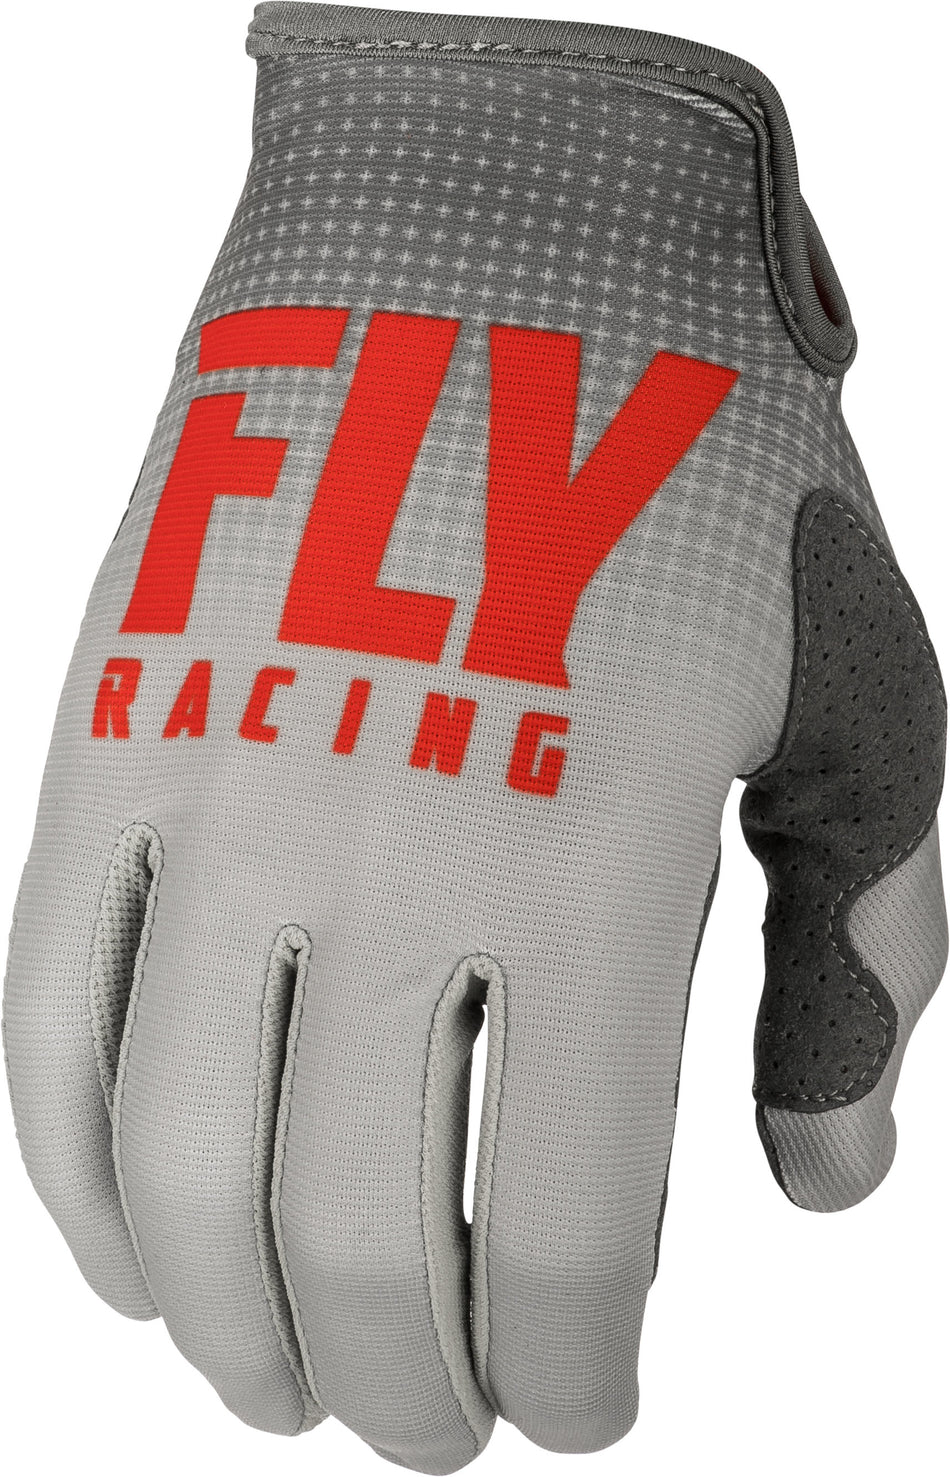 FLY RACING Lite Gloves Red/Grey Sz 10 372-01210